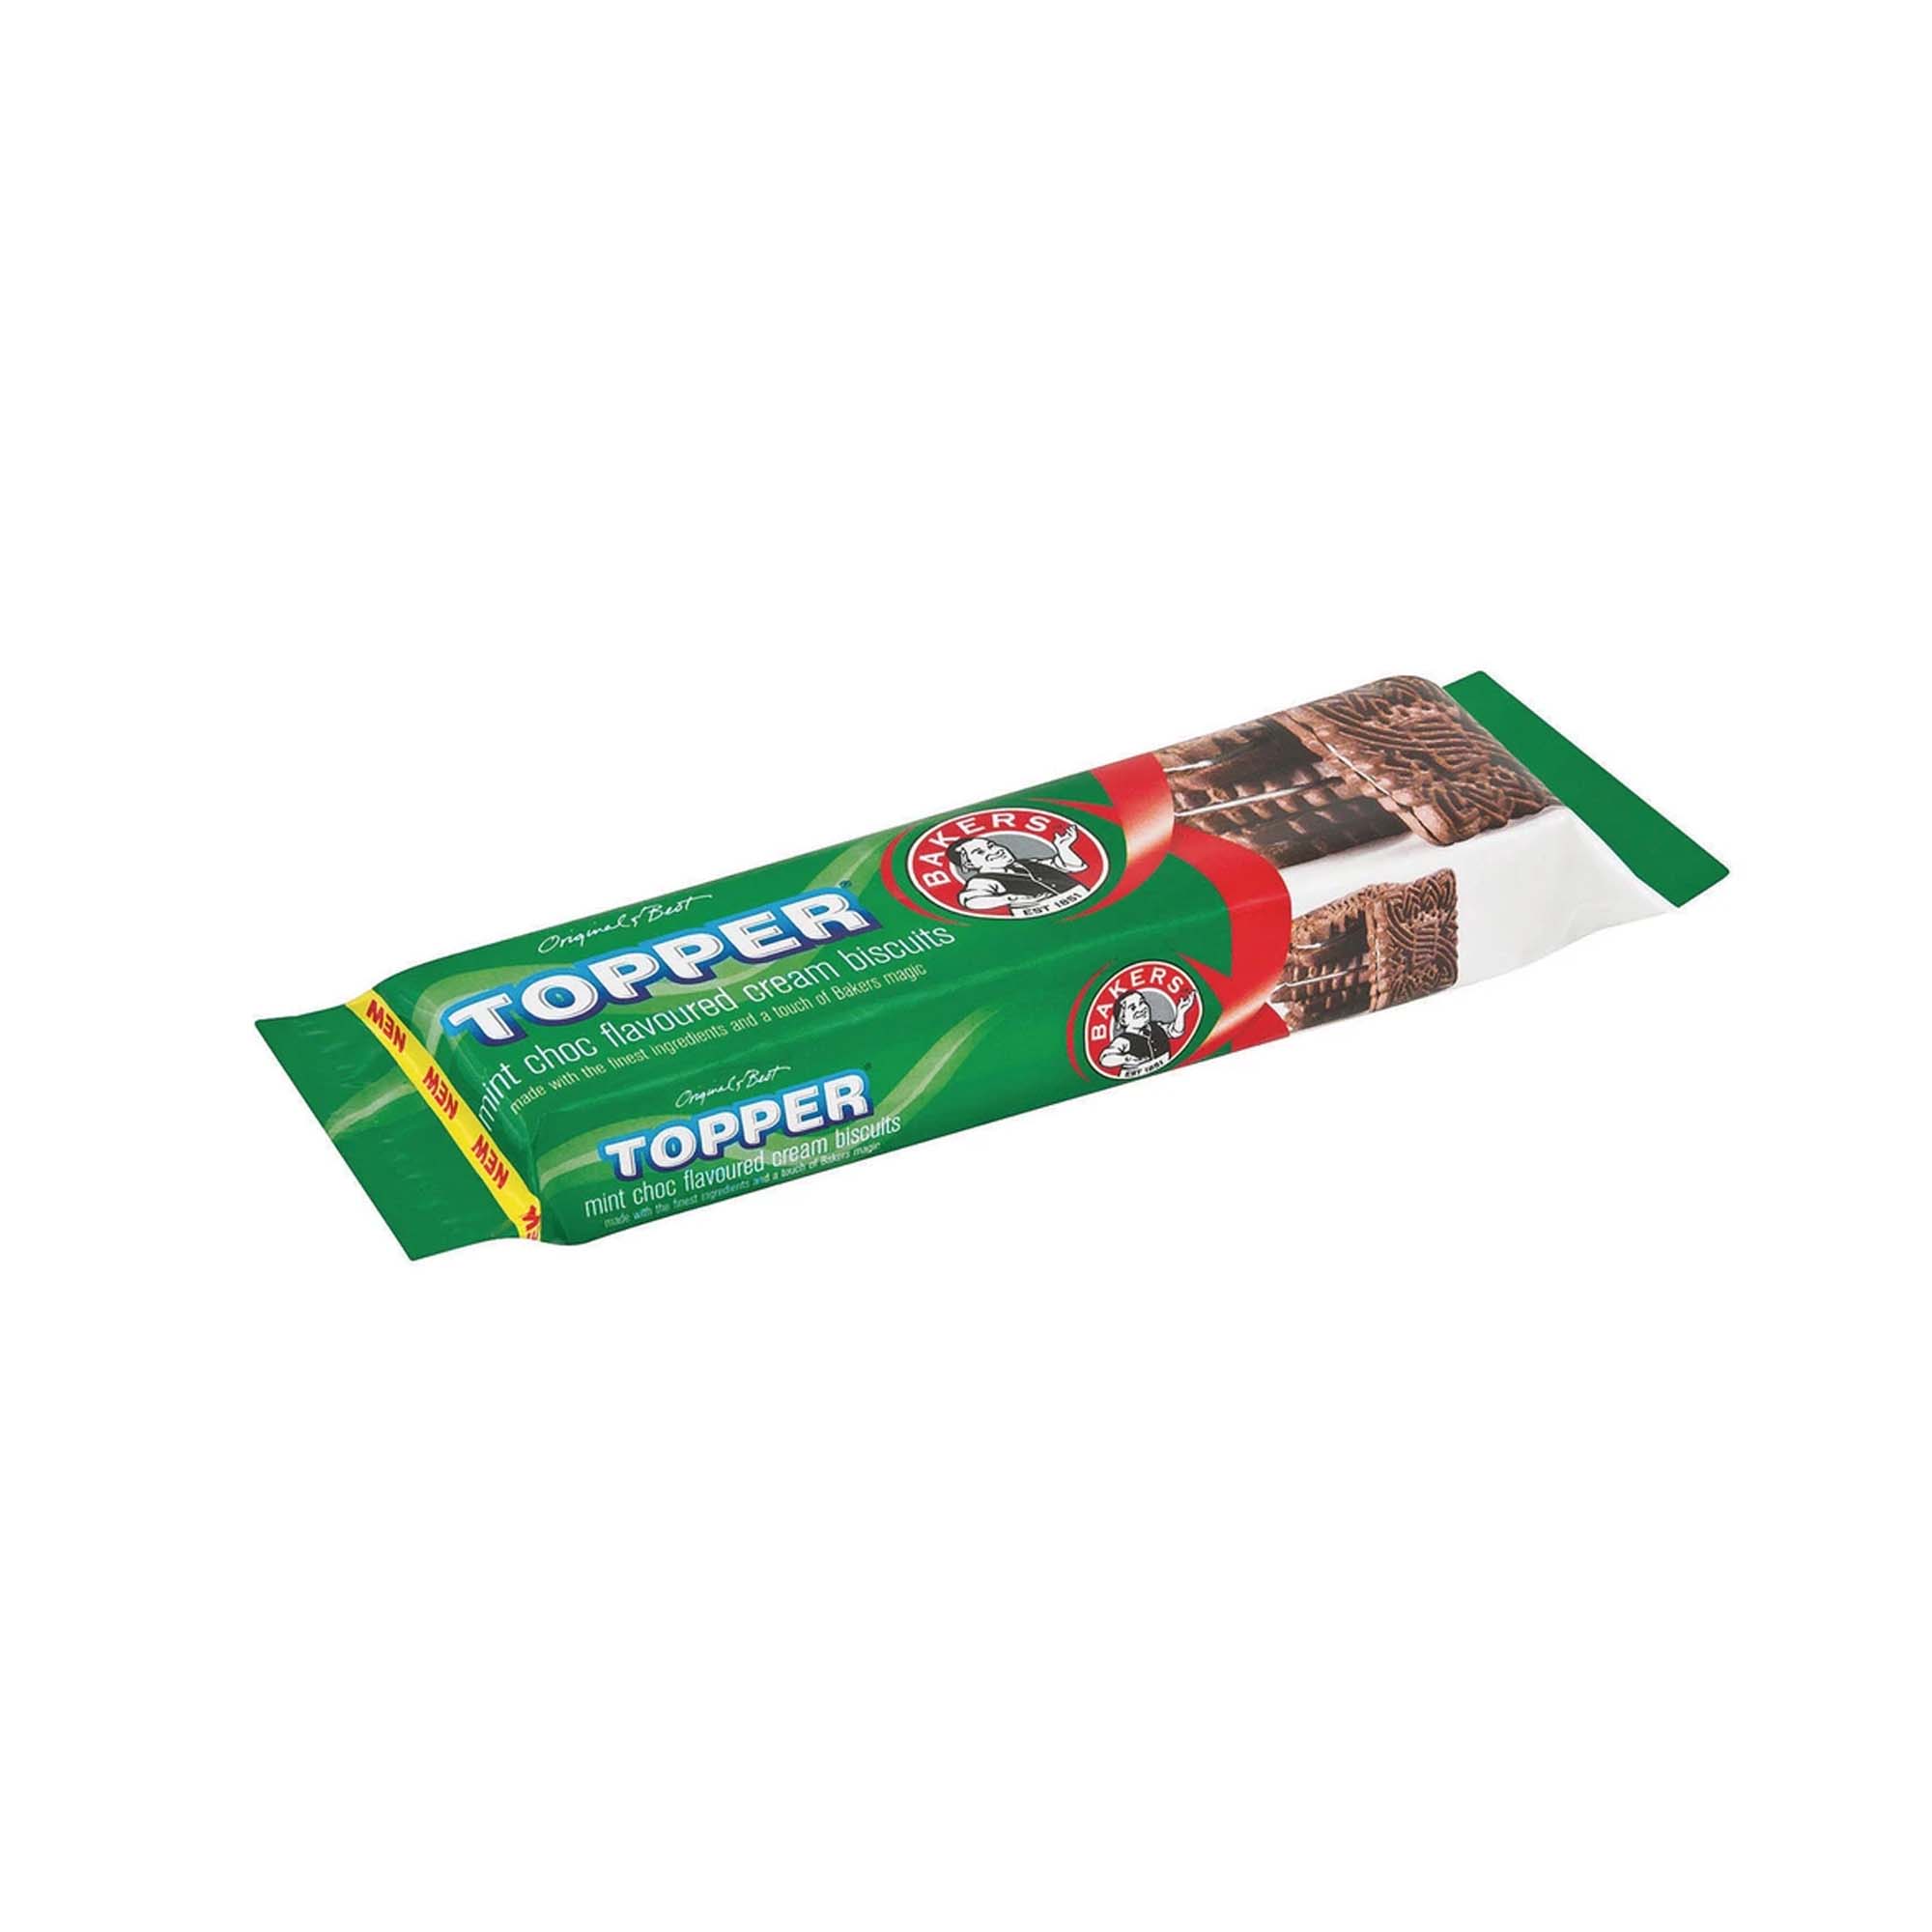 BAKERS TOPPER CHOC MINT 125g